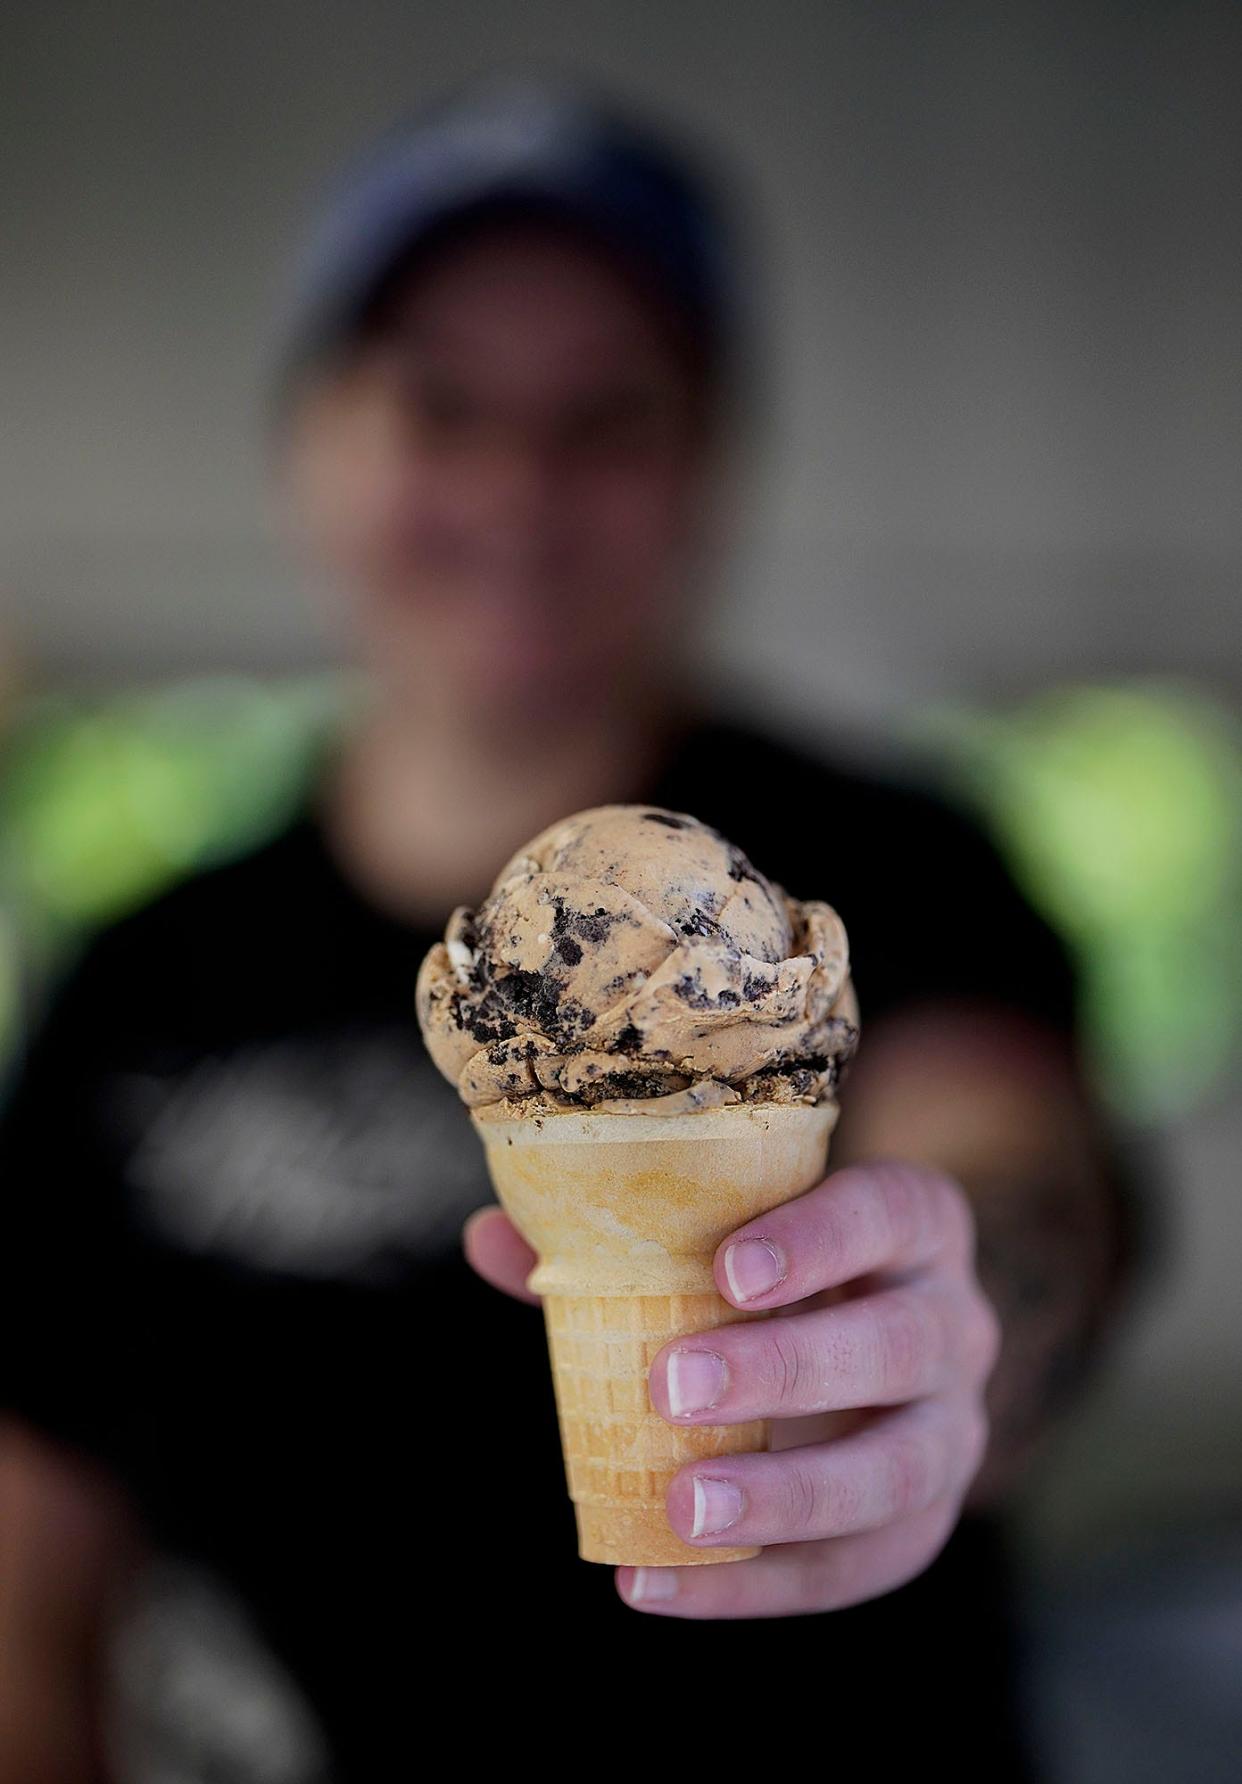 Emilee Flynn, an assistant manager at Wright's Creamery in North Smithfield, holds a cone with coffee Oreo ice cream, which ranks as Rhode Islanders' third-favorite flavor, according to an informal survey of ice cream shops.